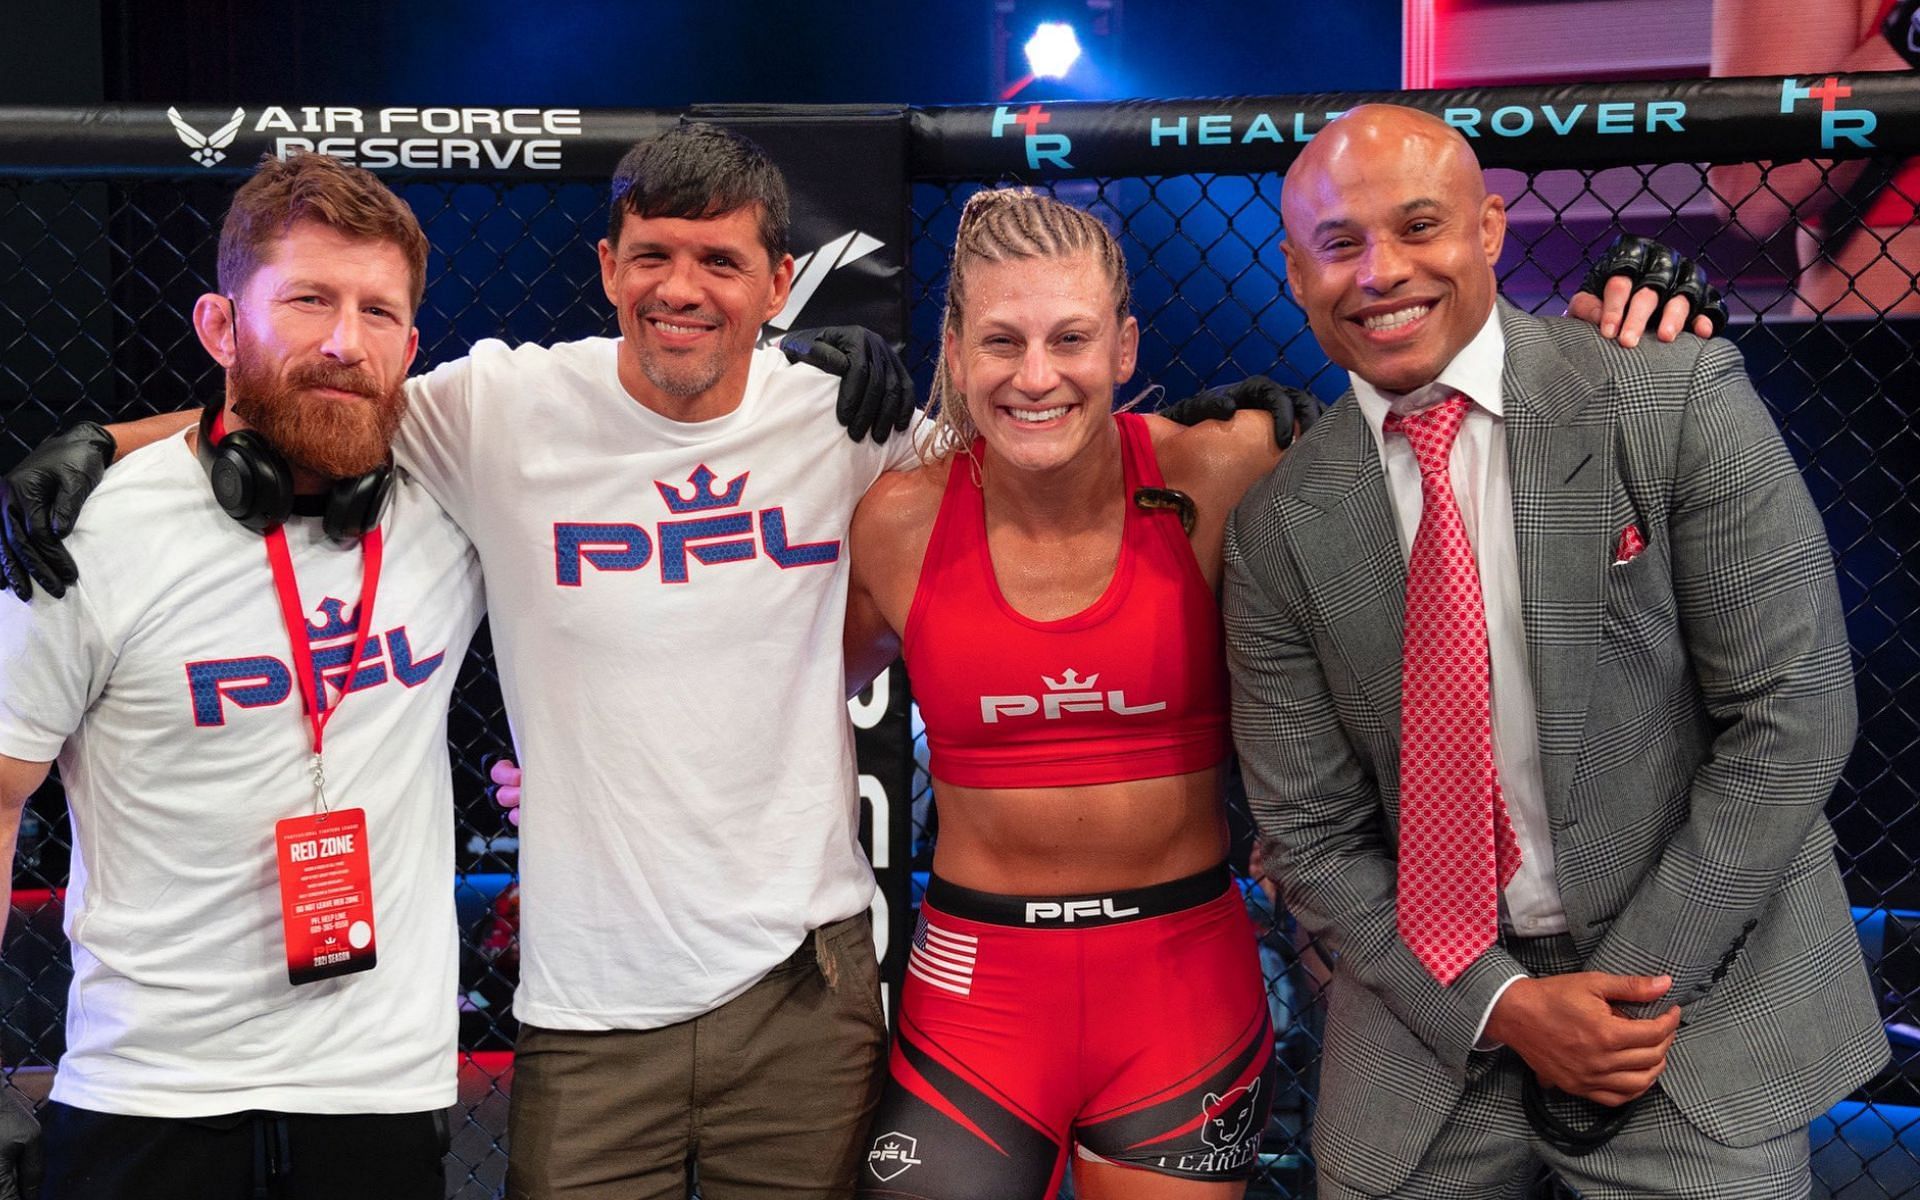 Kayla Harrison along with her team and manager Ali Abdelaziz